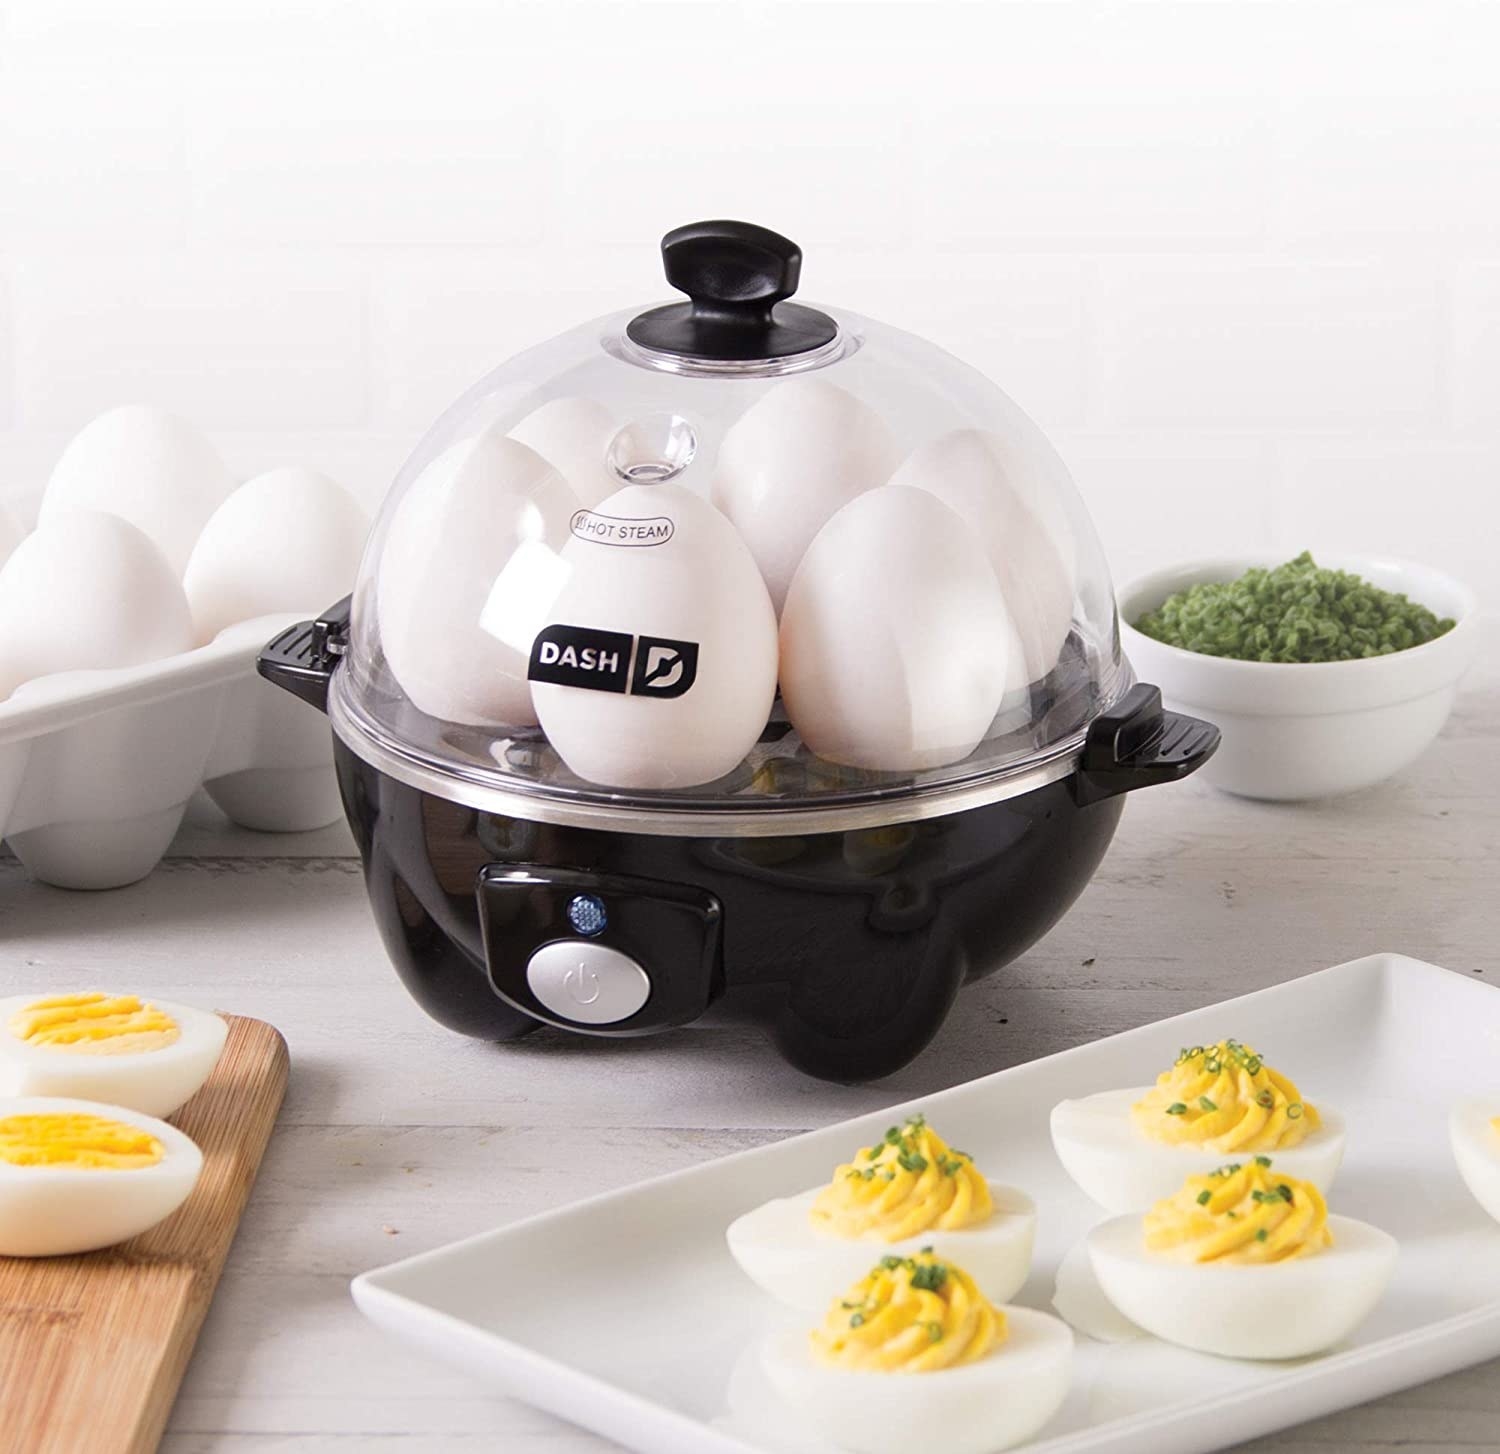 The egg cooker surrounded by eggs